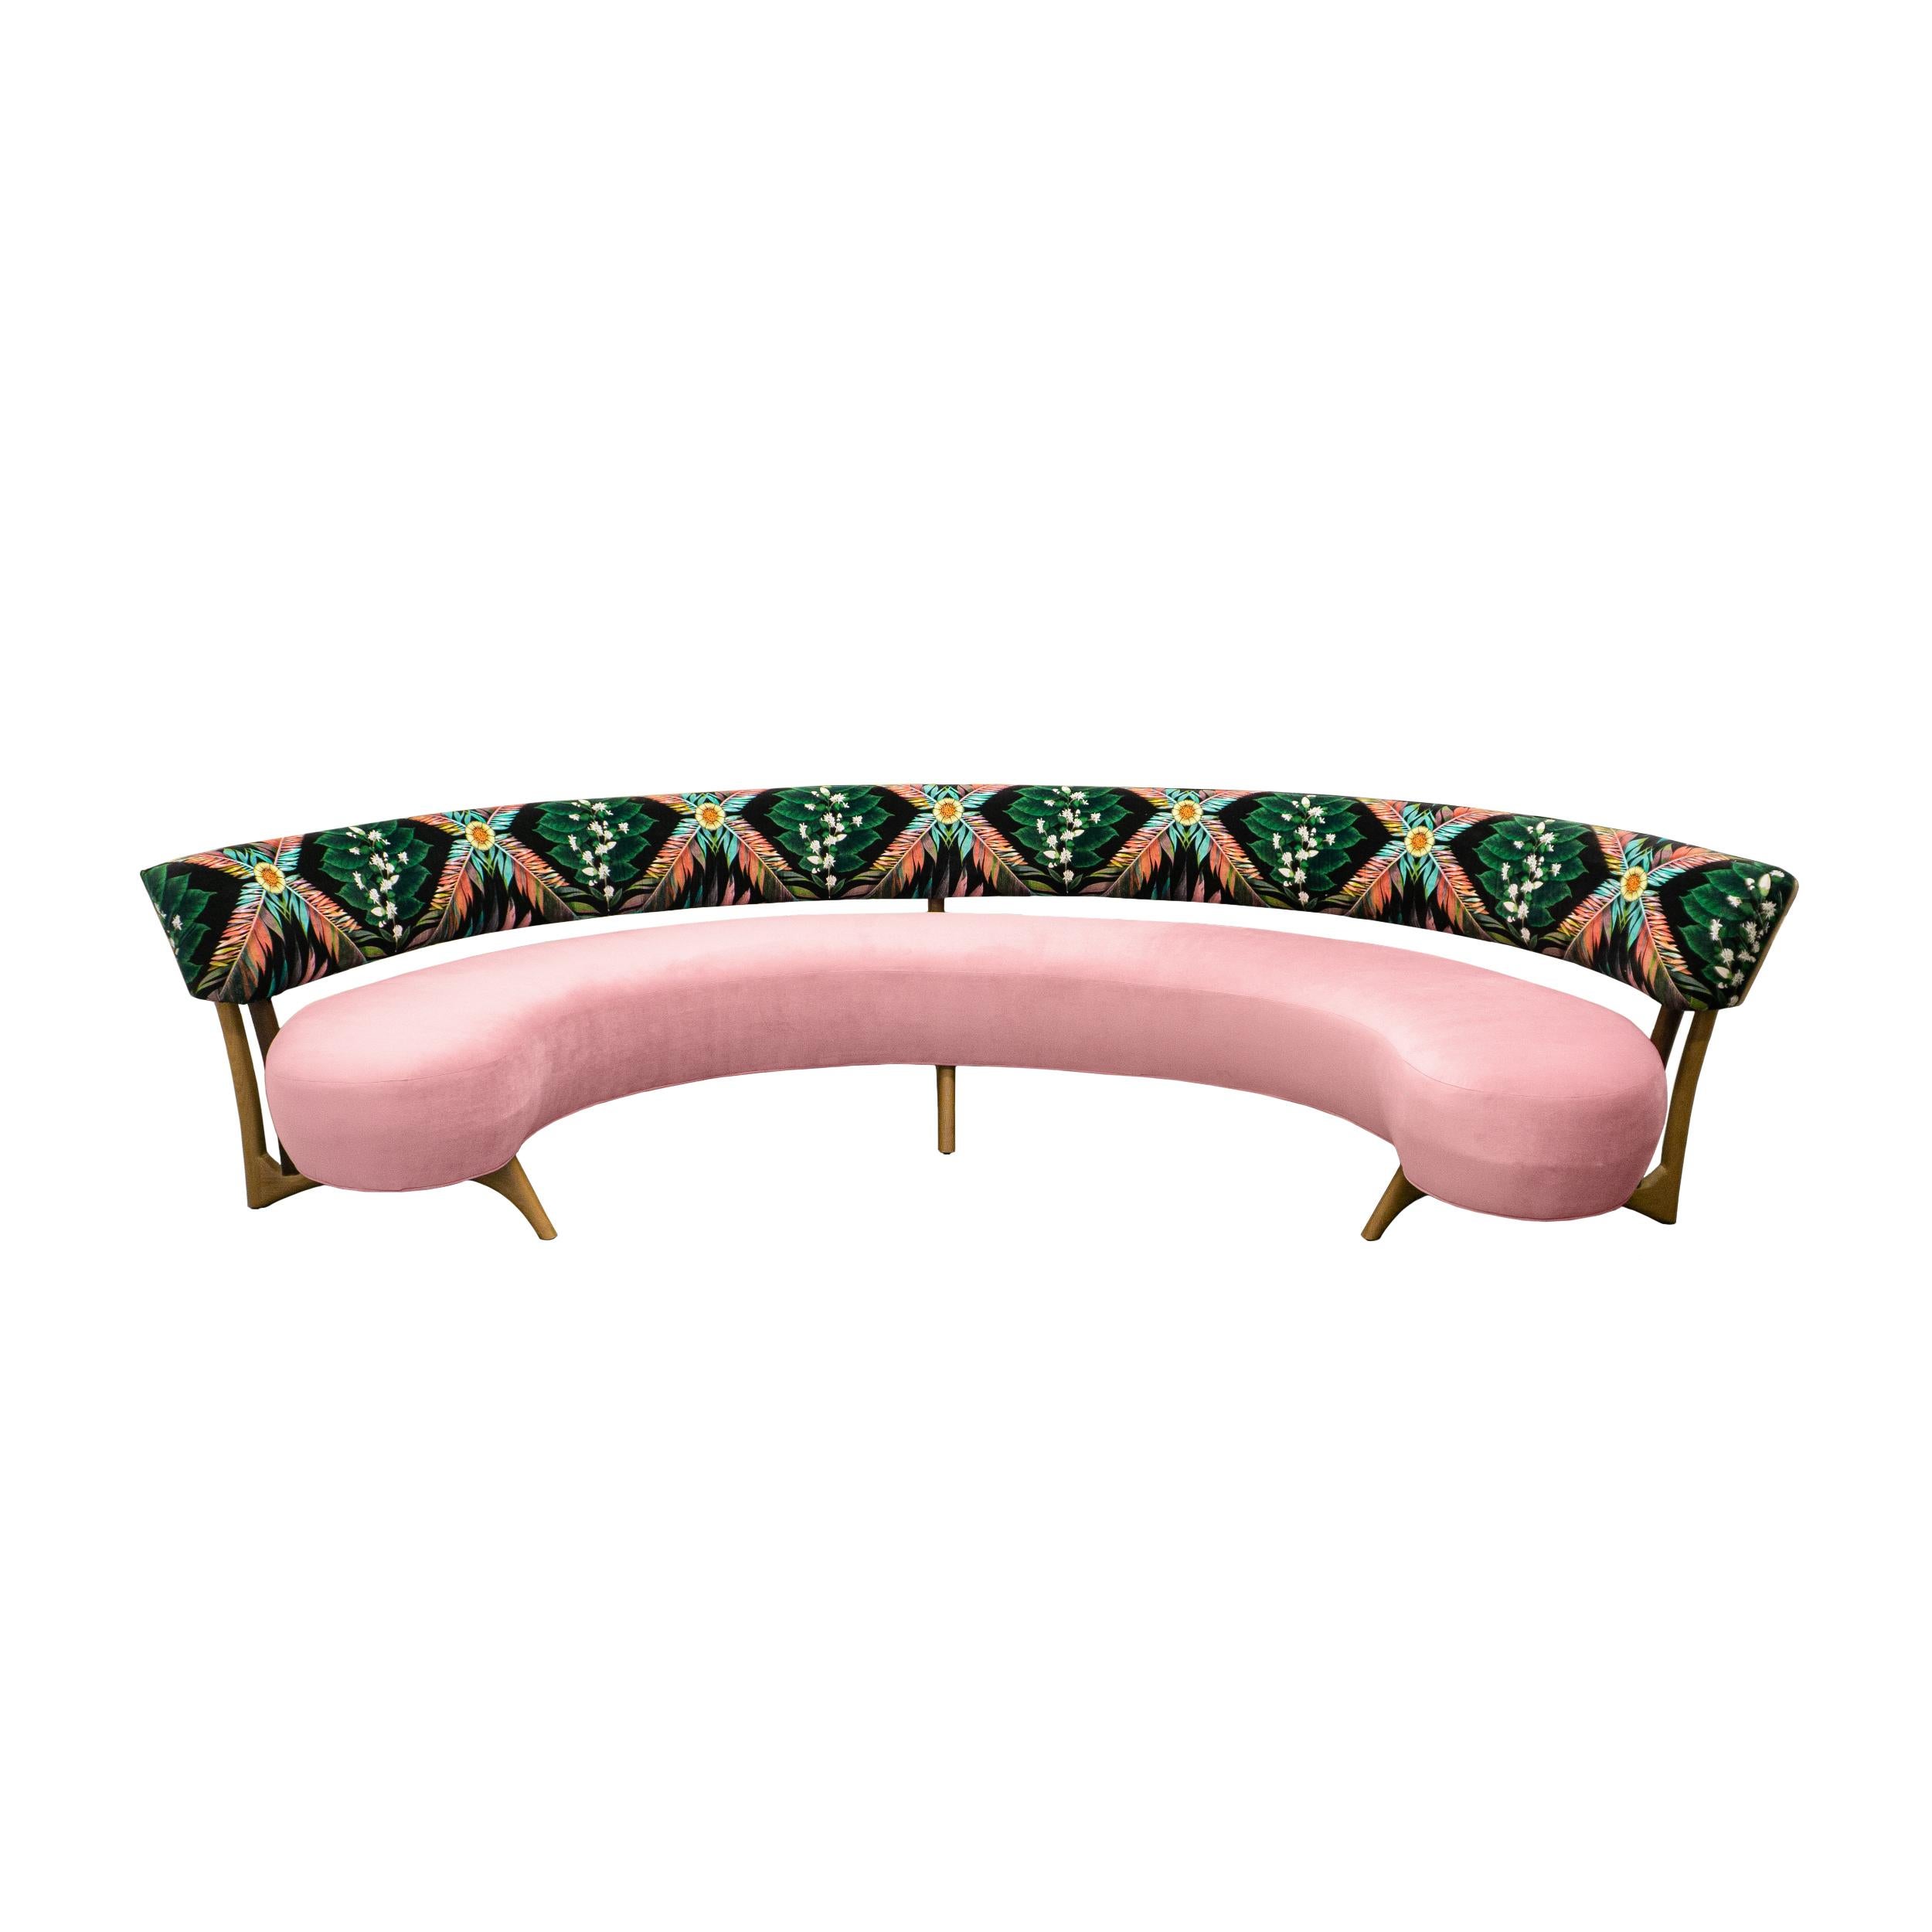 American Midcentury Floating Curved Sofa/w Printed Velvet and Burlap Welting For Sale